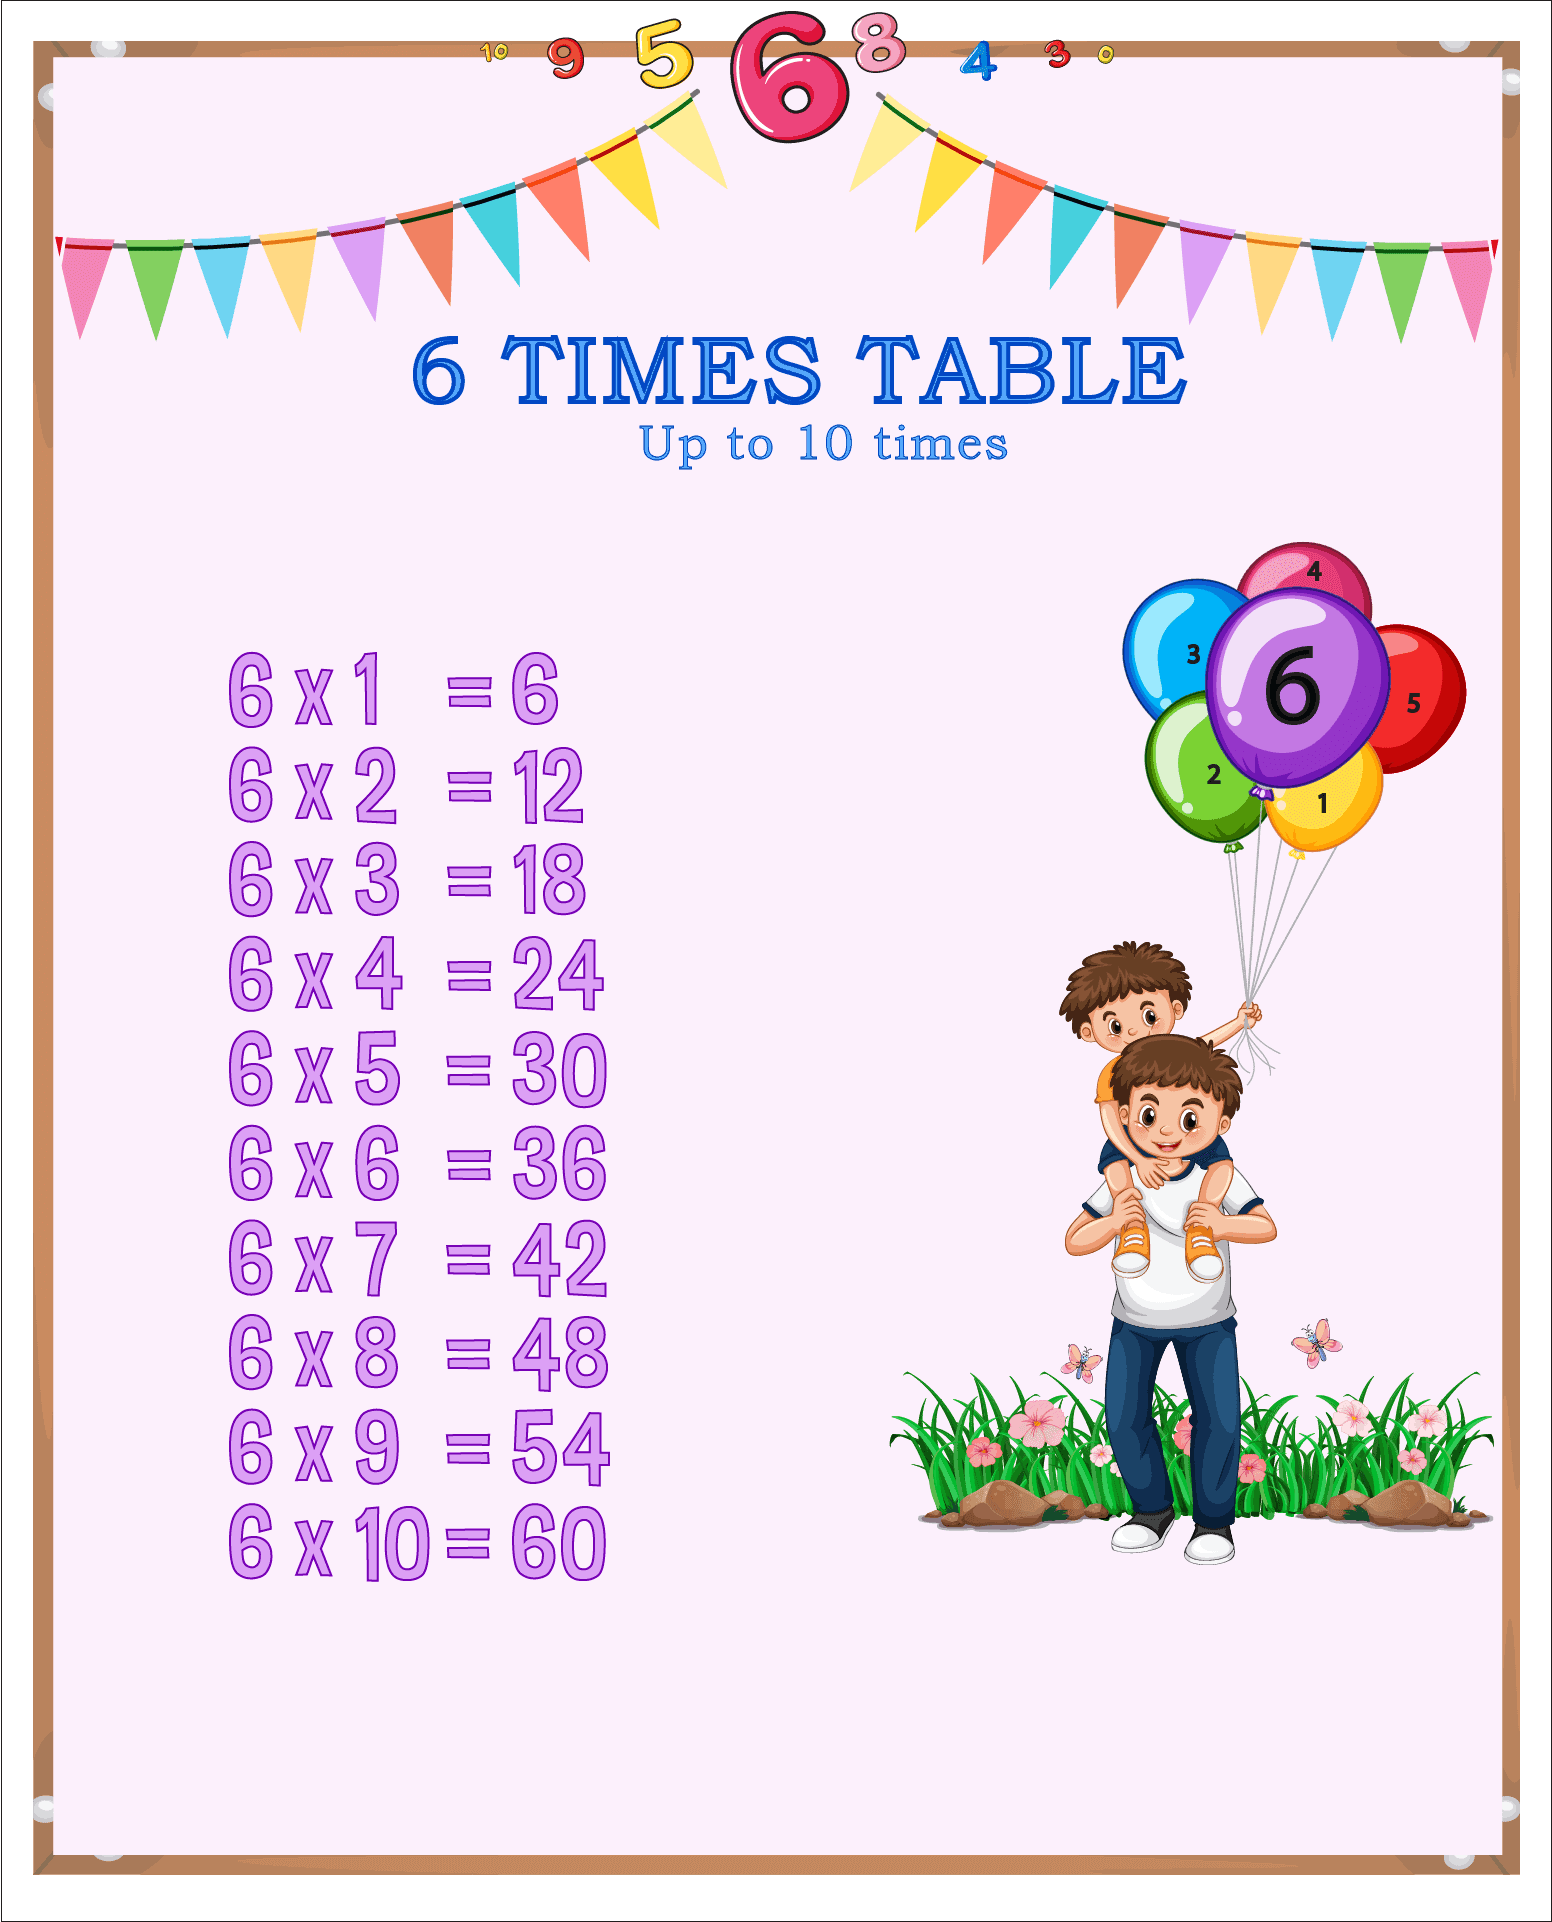 6 Times Table upto 10 times